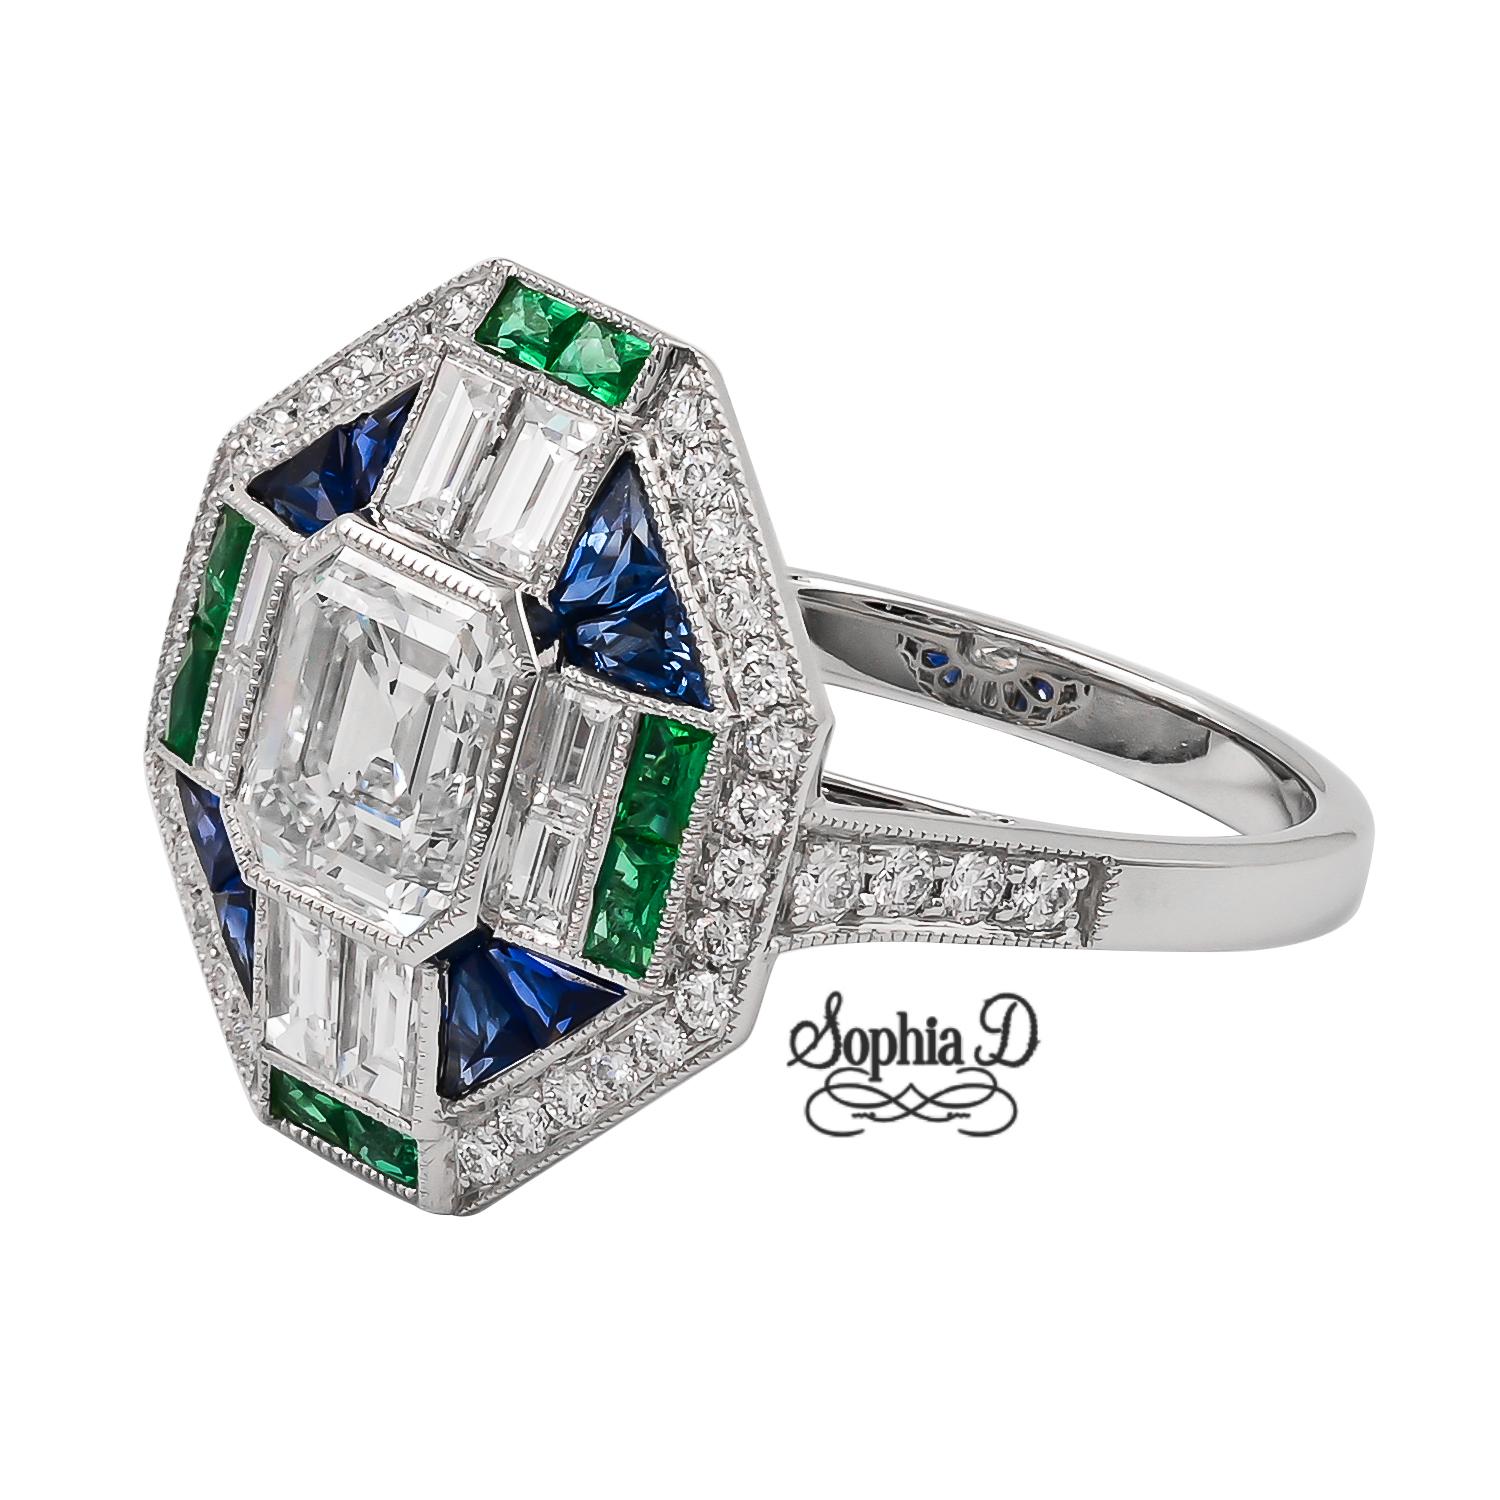 Cushion Cut Sophia D. Art Deco Ring in Platinum with Diamonds, Emeralds and Blue Sapphires For Sale